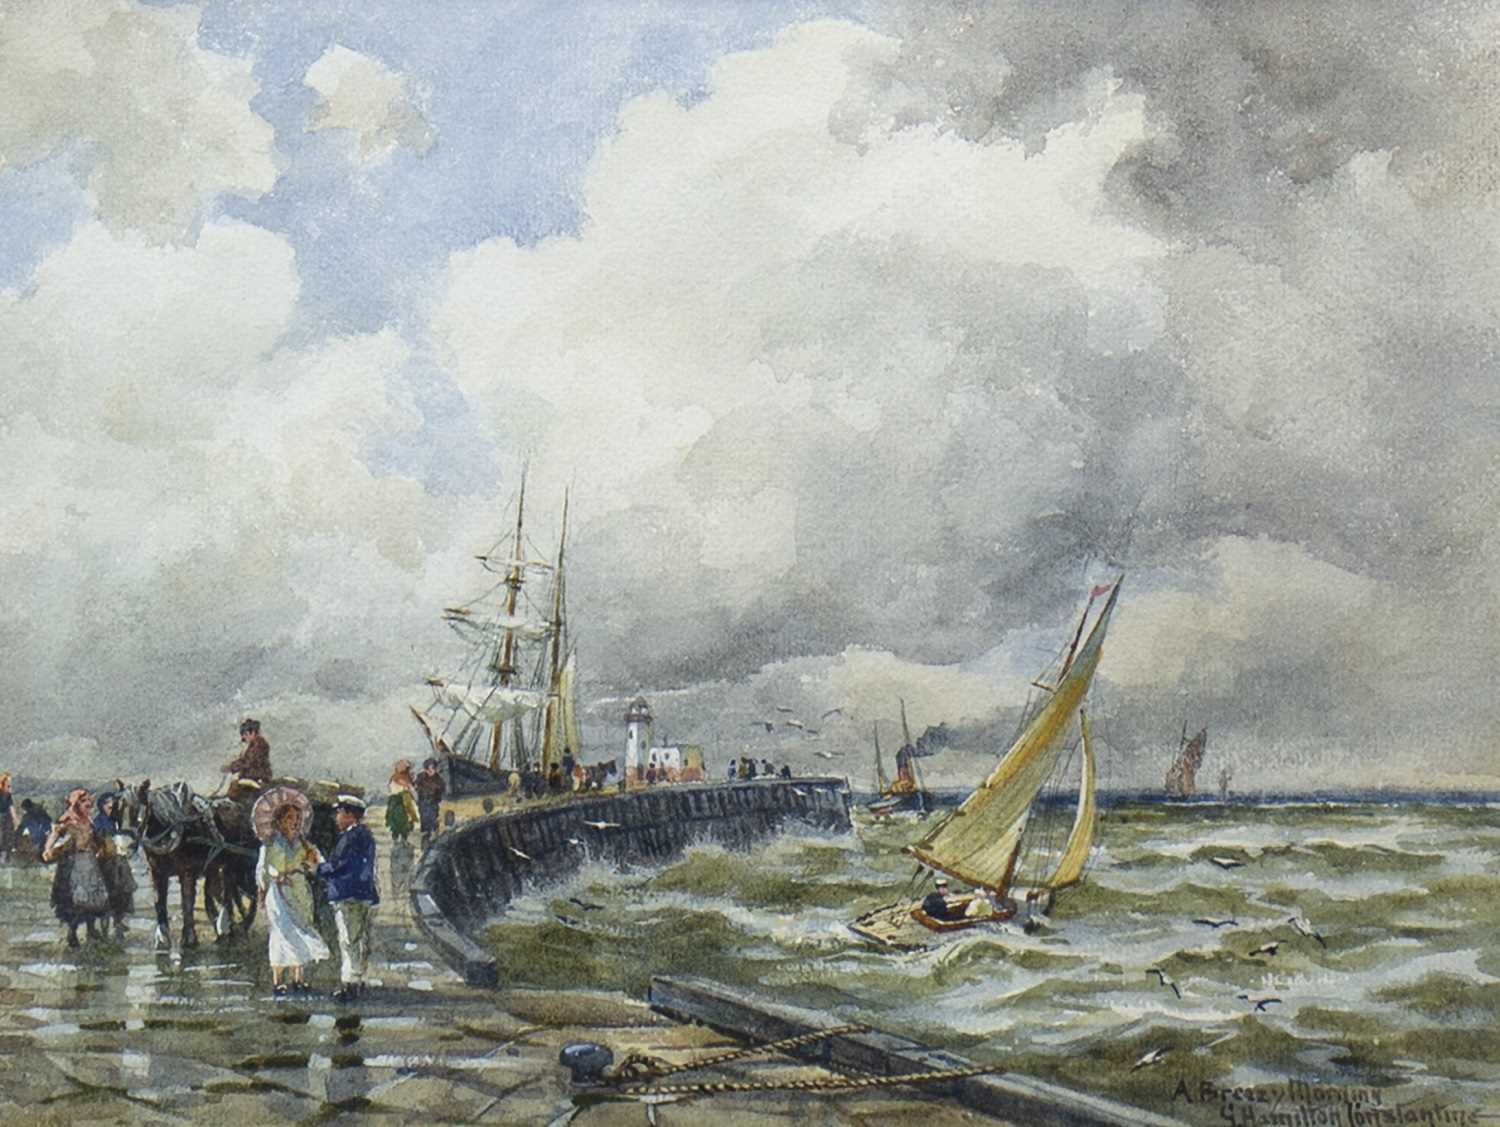 Lot 706 - A BREEZY MORNING, A WATERCOLOUR BY GEORGE HAMILTON CONSTANTINE